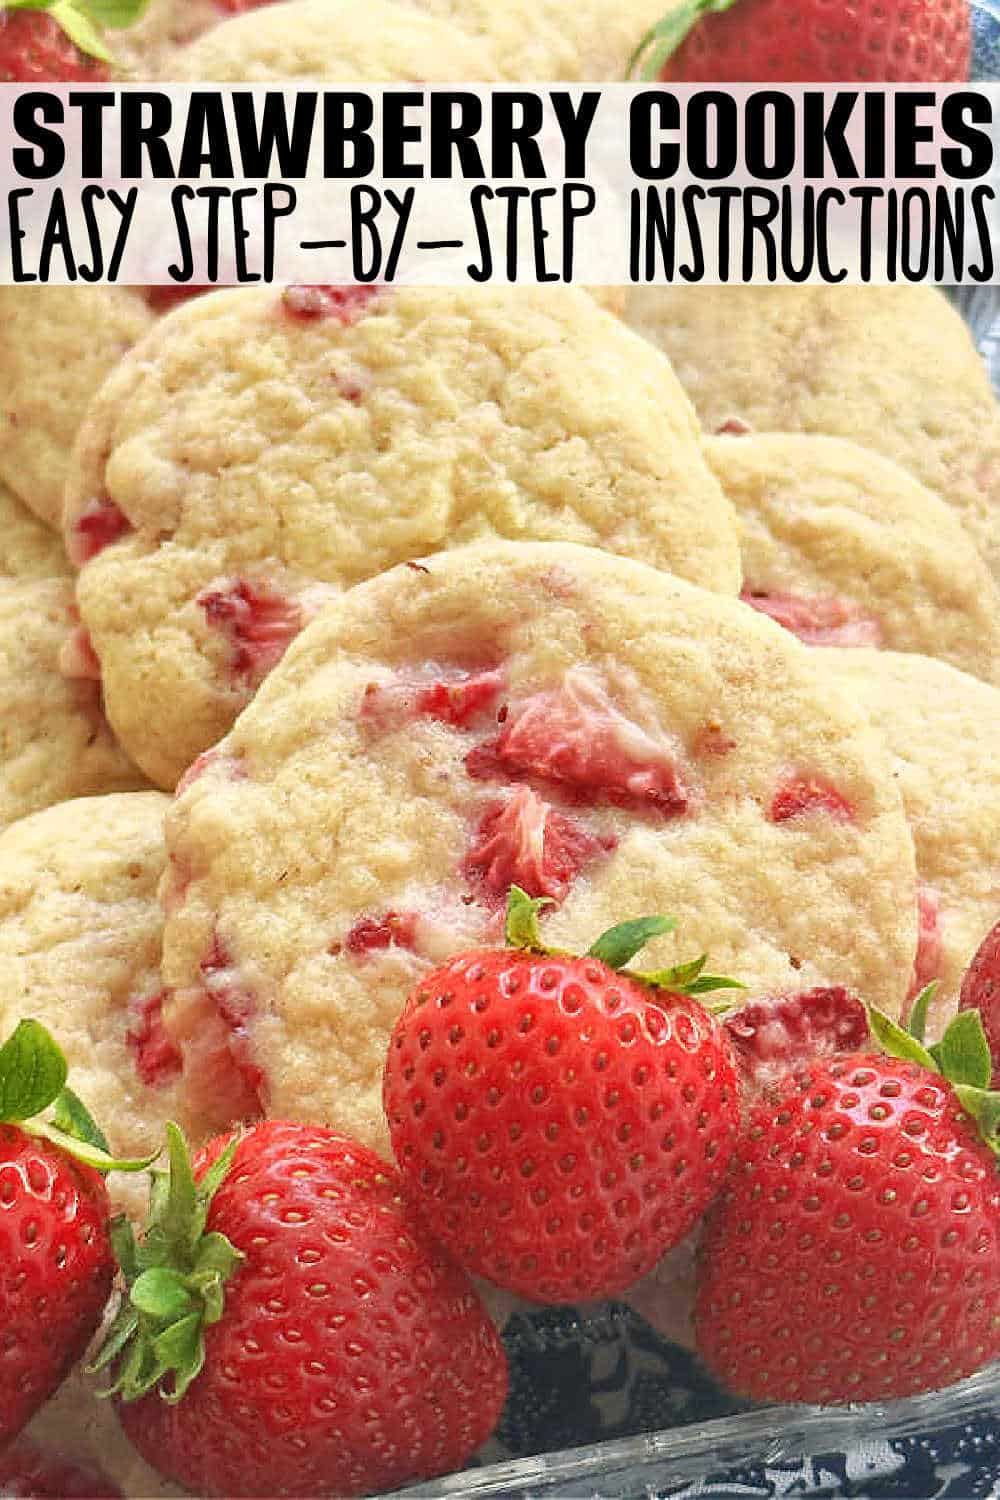 These Strawberry Sugar Cookies combine my grandma's sugar cookie recipe with chopped fresh strawberries for the most delightful treat. Each cookie is like a mini strawberry cake! via @foodtasticmom